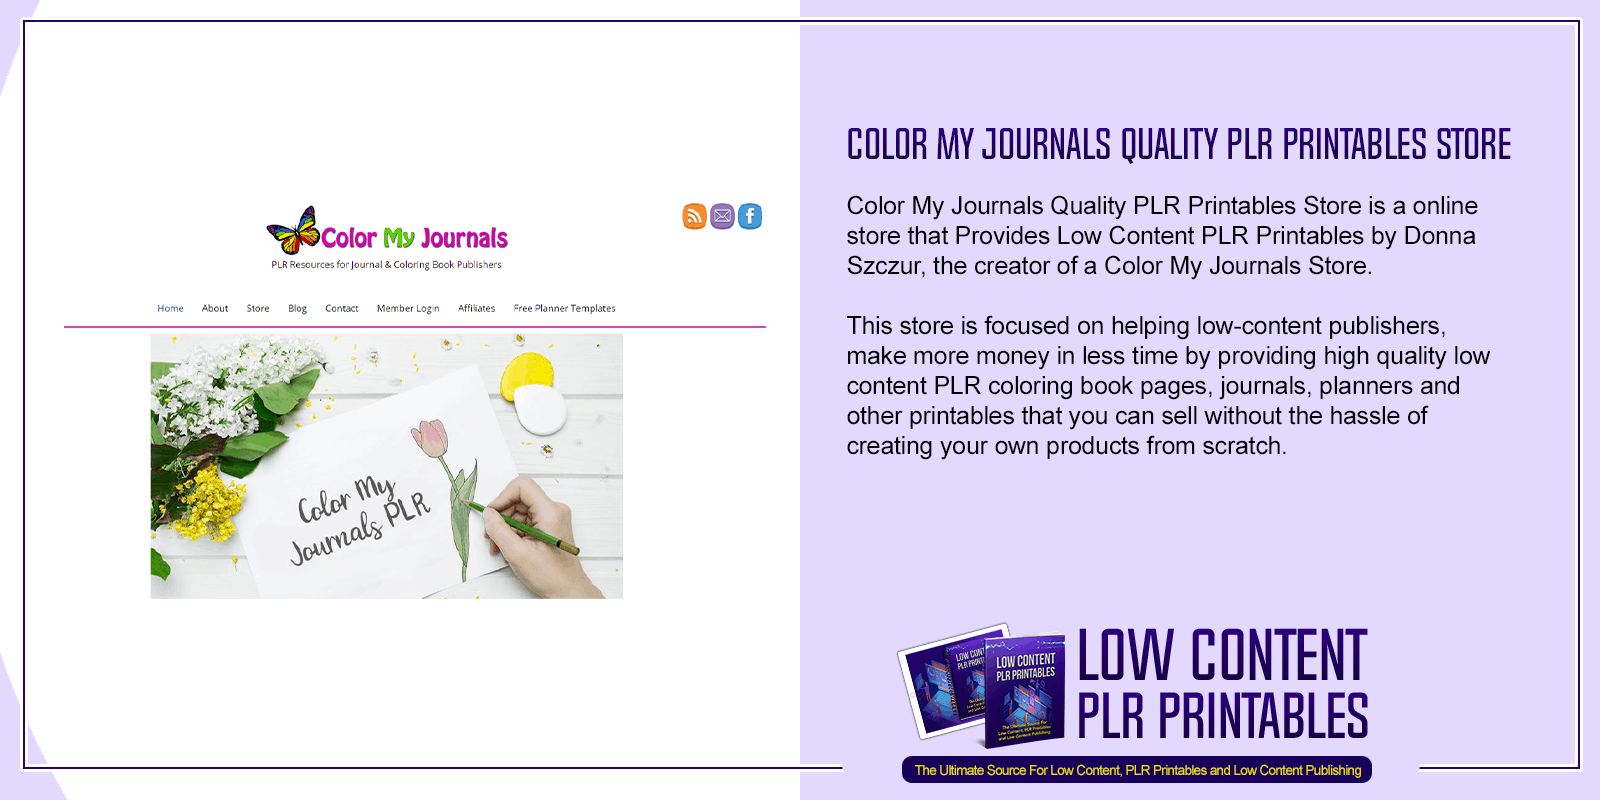 Color My Journals Quality PLR Printables Store